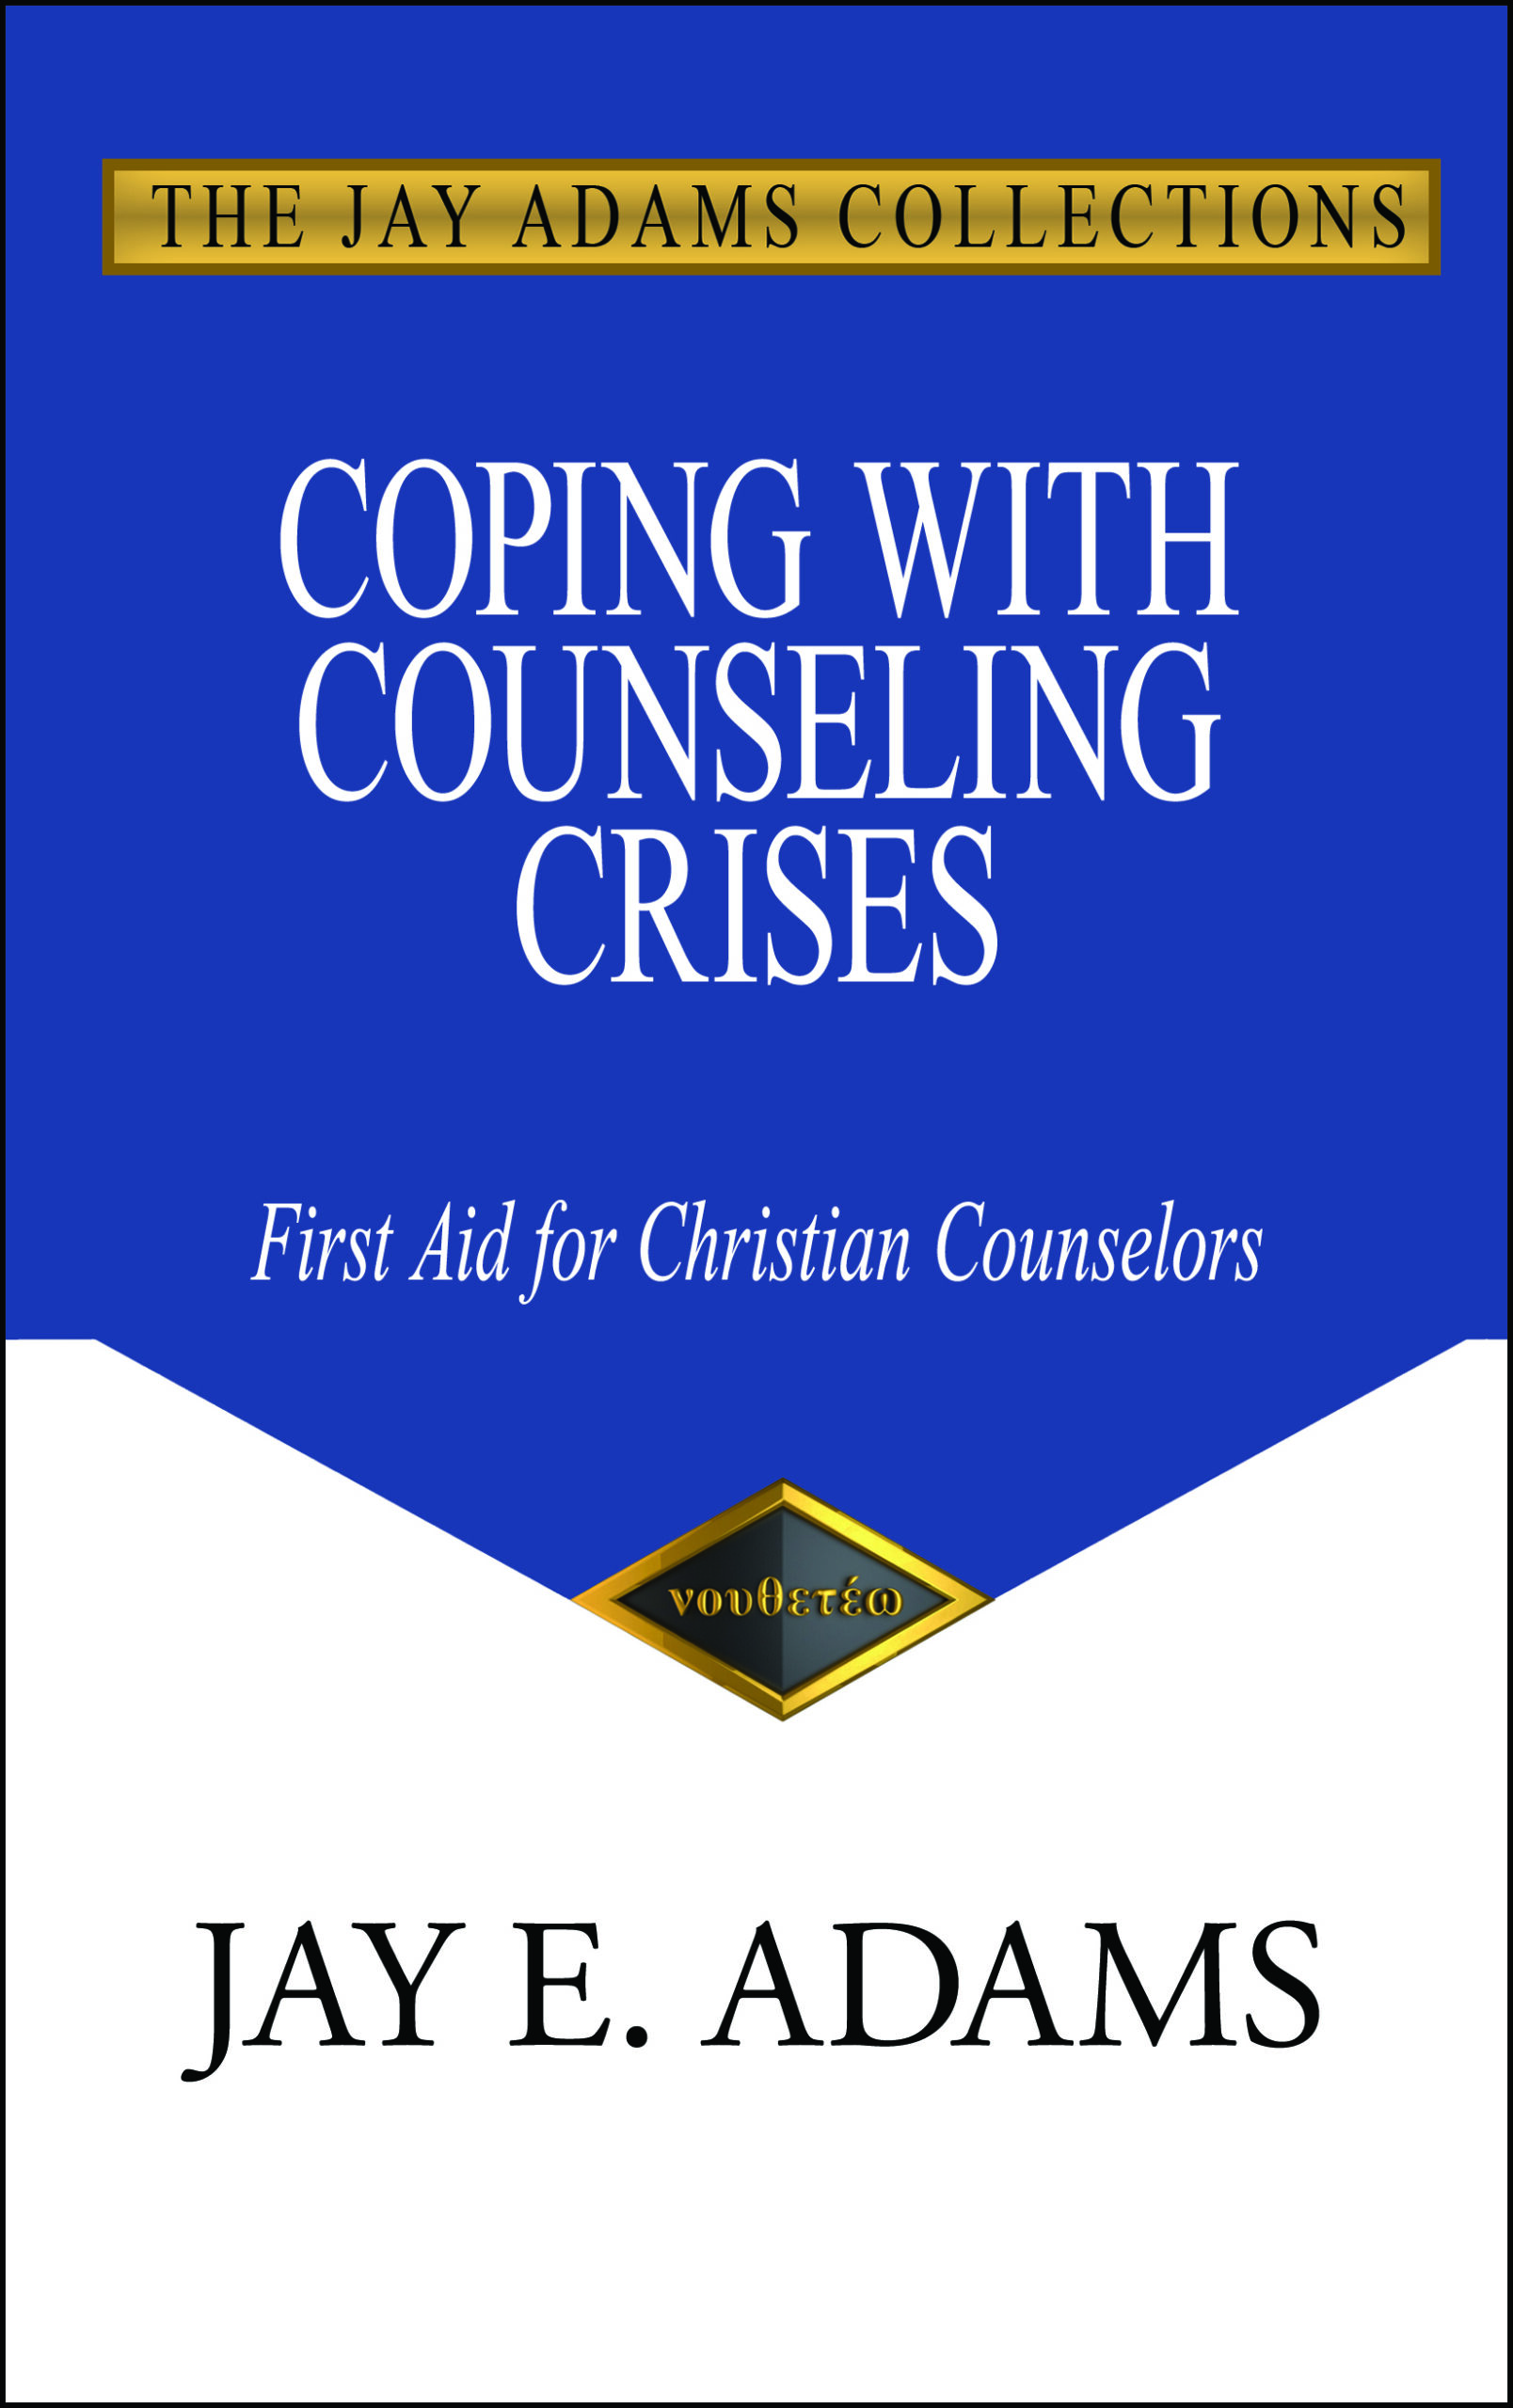 Coping with Counseling Crises: First Aid for Christian Counselors